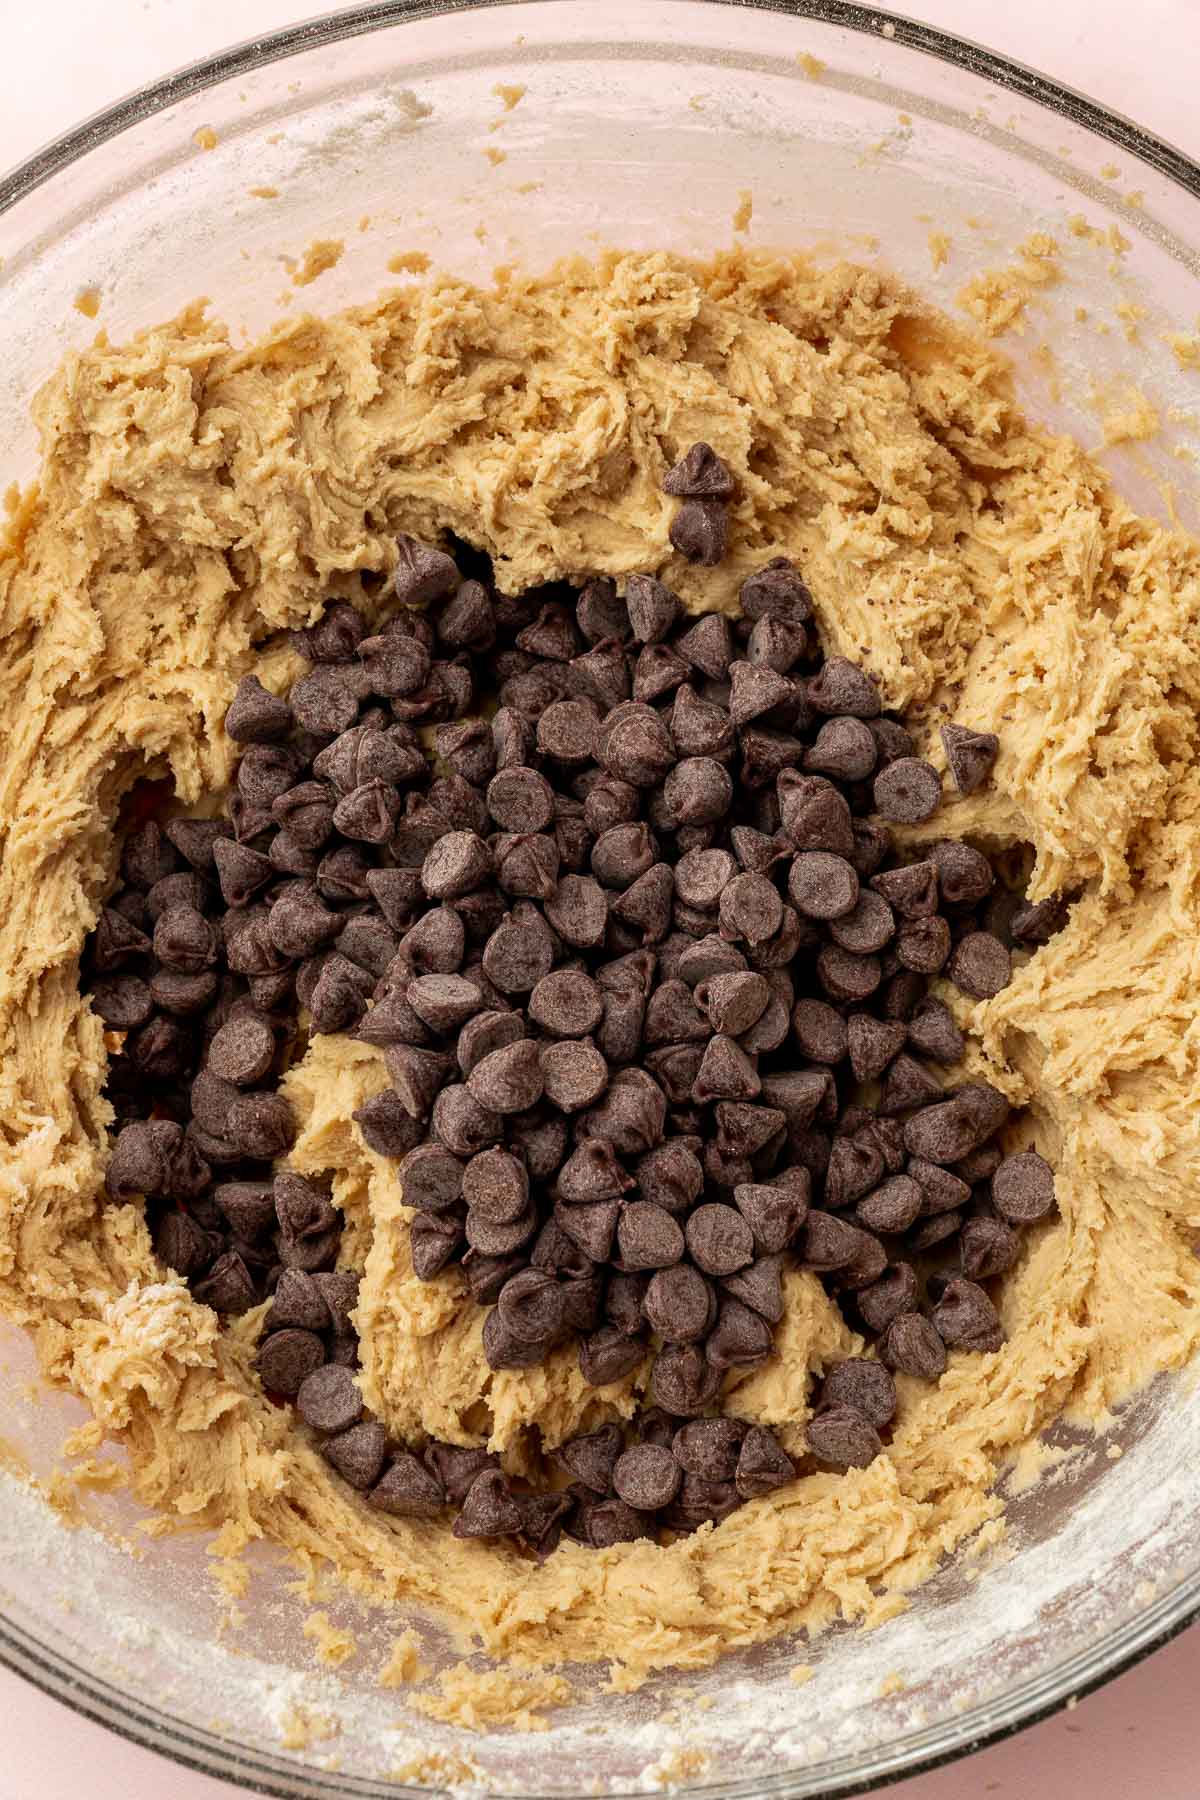 A glass mixing bowl with gluten-free cookie dough topped with a pile of semi-sweet chocolate chips before mixing together.